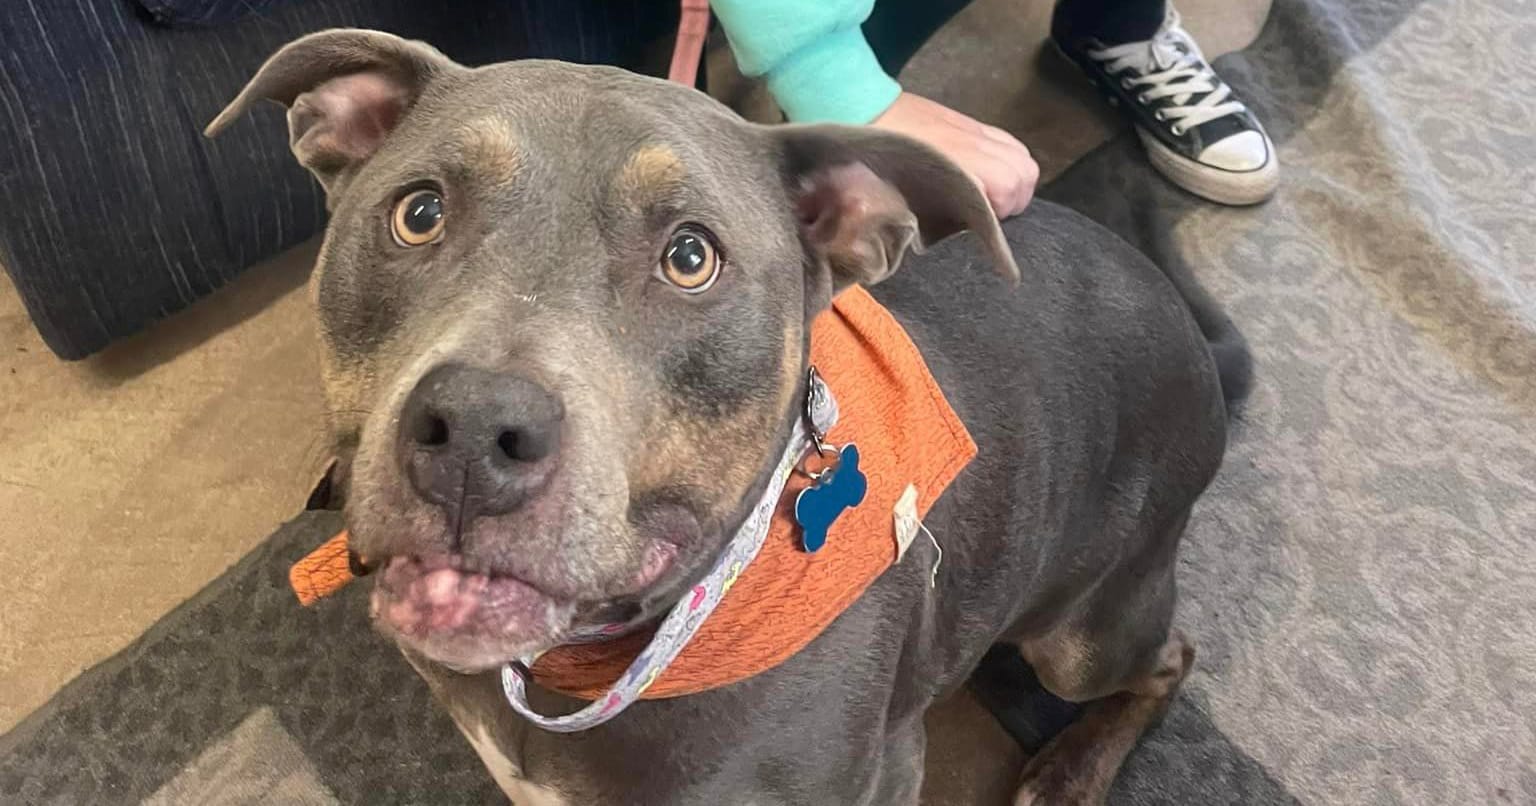 Woman adopts dog who has been in shelter for 7 years — gets remarkable sign that it’s meant to be